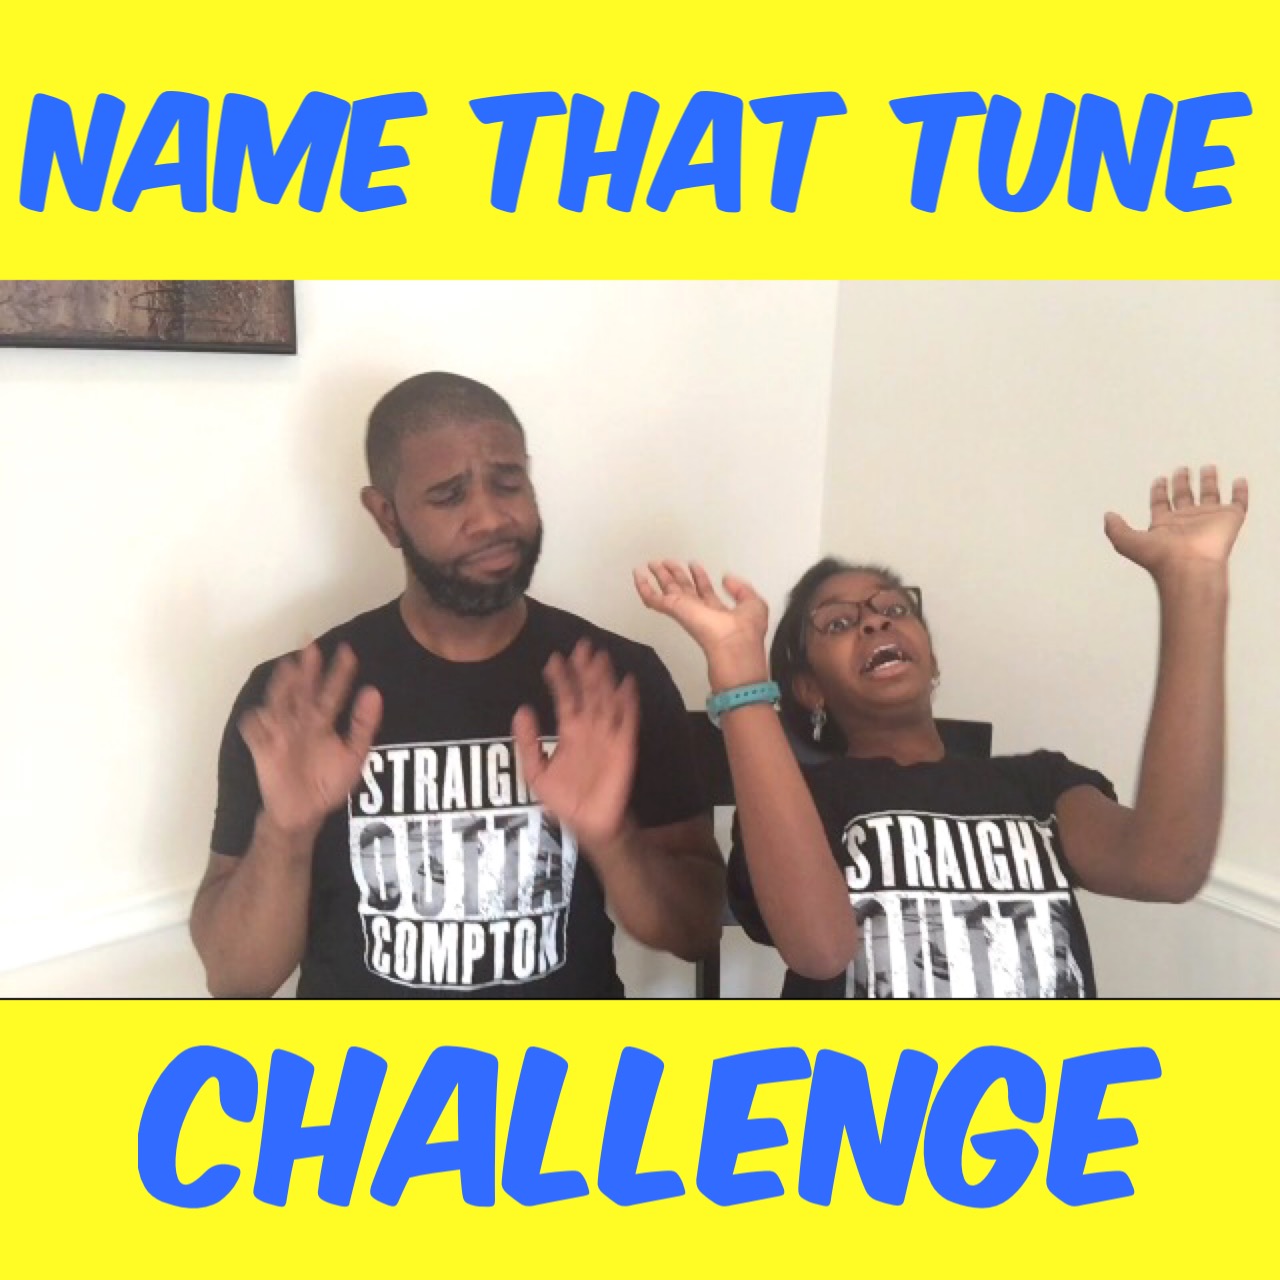 Showtime's Name That Tune Challenge